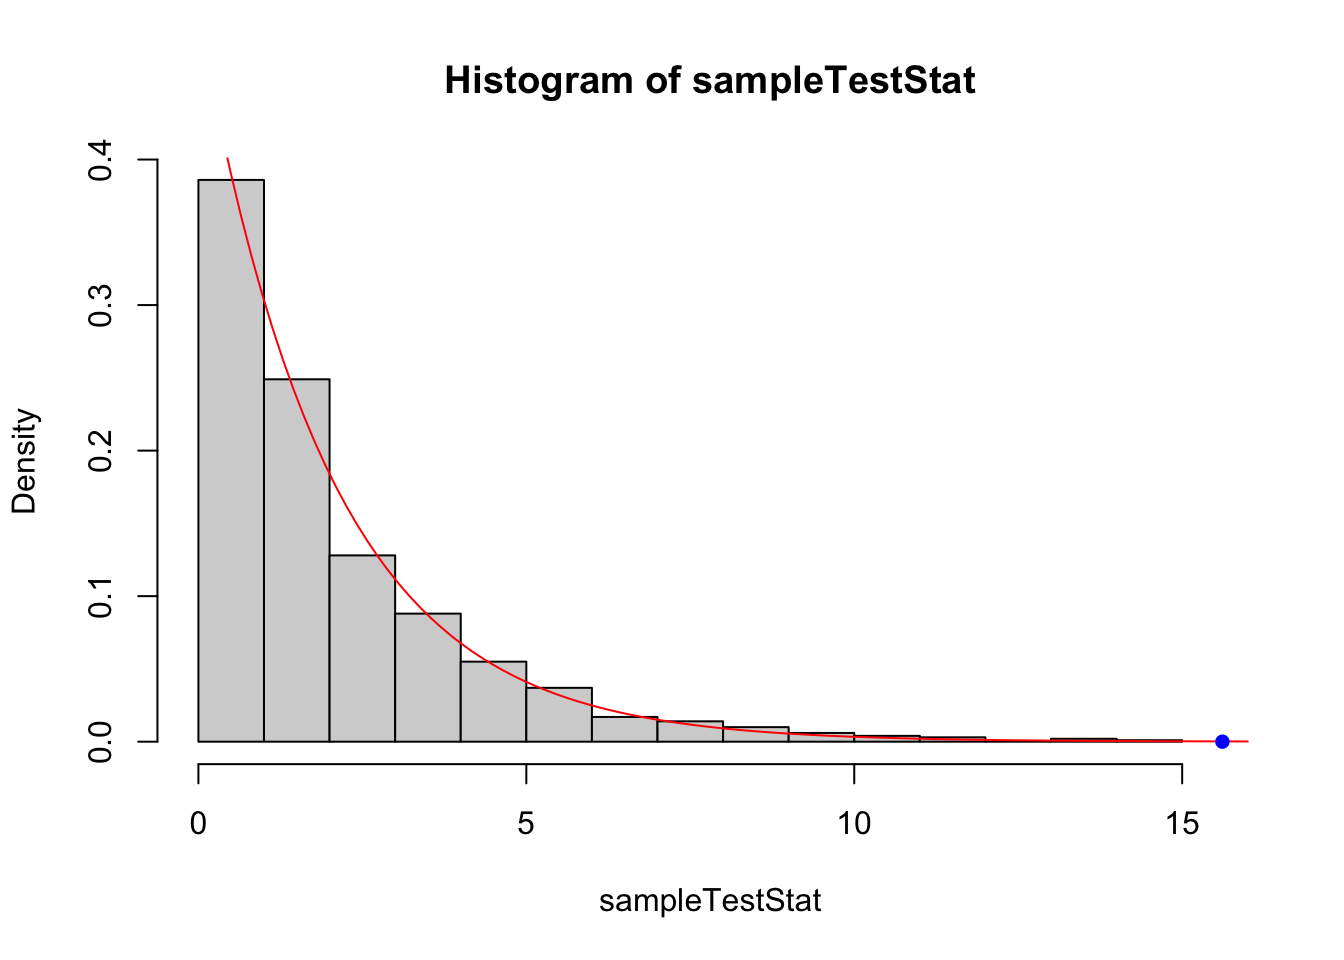 Comparing the distribution of the test statistic from bootstrapping (histogram) with the $\chi^2_2$ approximation used in the generalised likelihood ratio test. The agreement looks fairly good here. The blue dot indicates the observed test statistic.